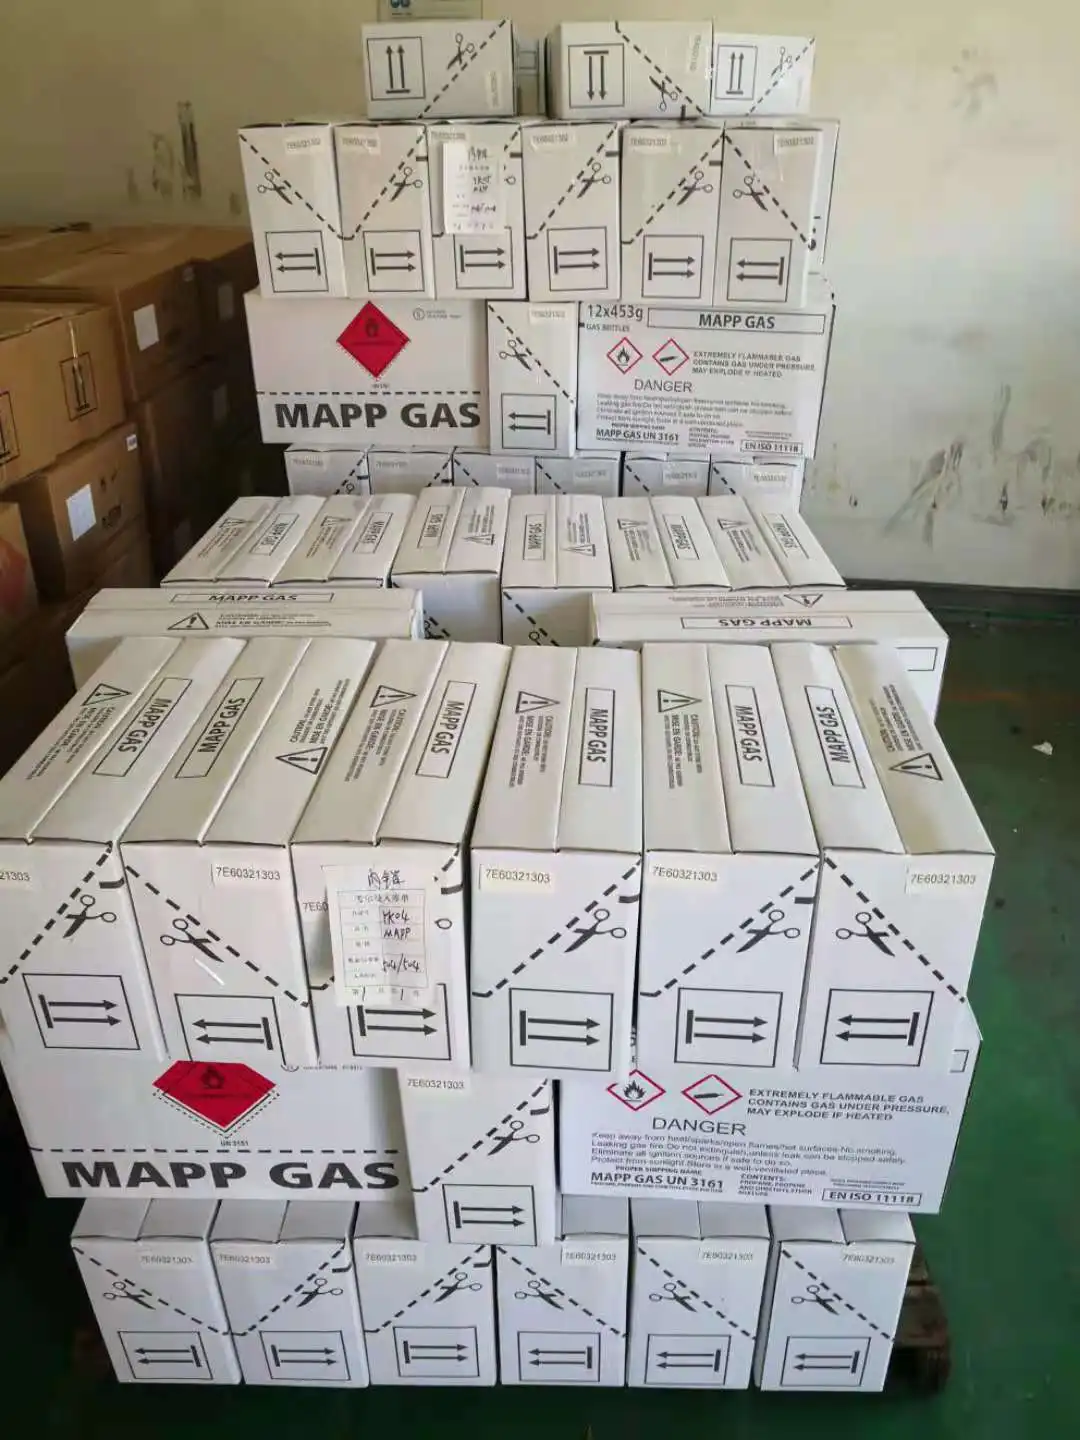 Mixture Of Hydrocarbons Mapp Gas for sale best price high quality burning gas for professional net weight 16OZ/453.6g